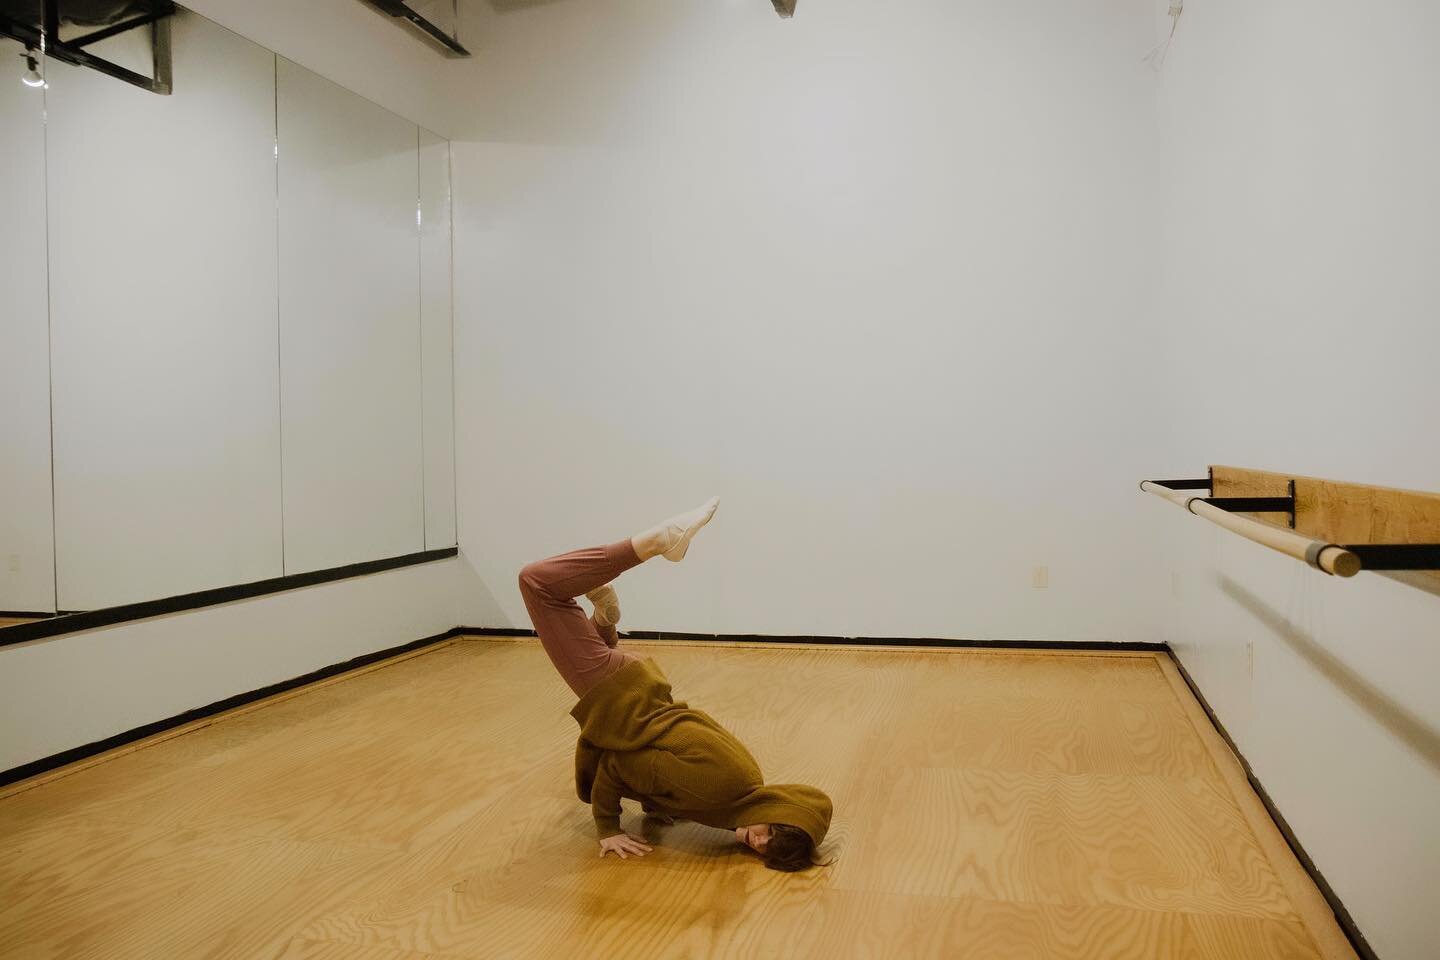 Small dance studio available for rent. A beautiful space to explore your art.

#dallas #smallbusiness #dallasrental #dallasdance #dallasarts #dance #womenownedbusiness #dallaswomenownedbusiness #dallassmallbusiness